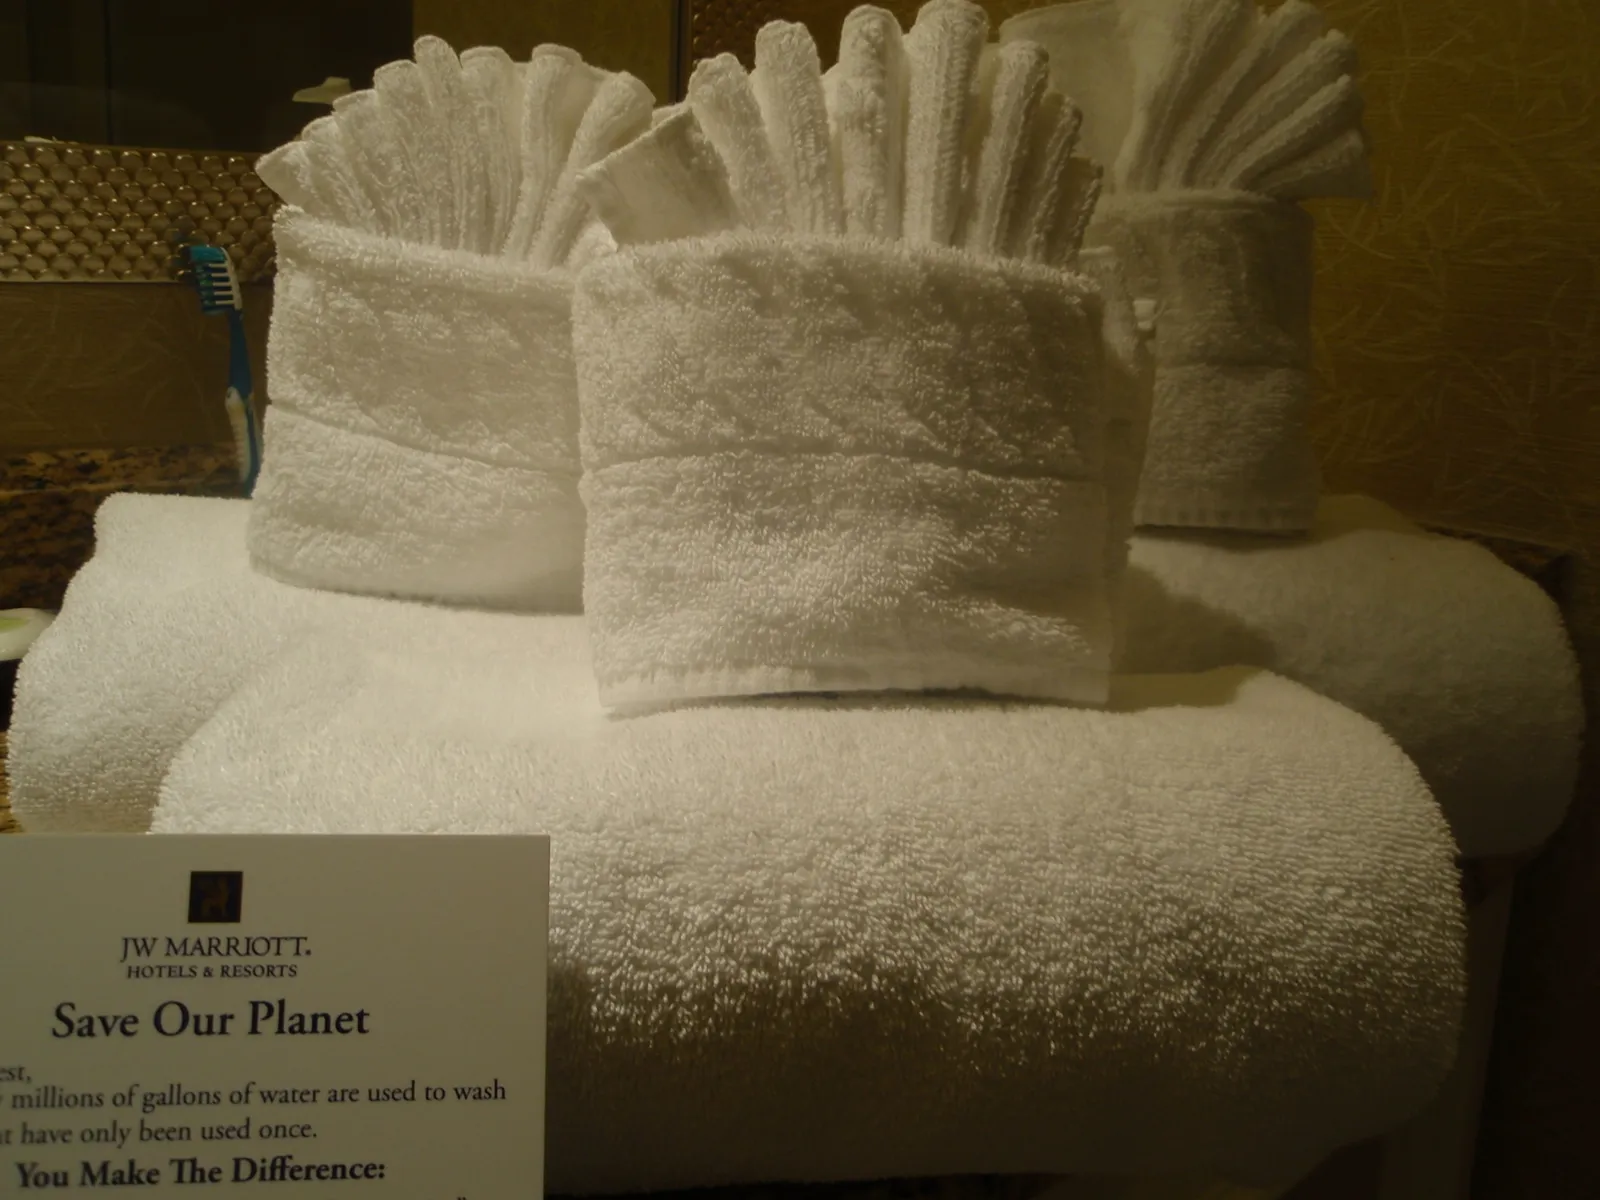 Reusing Hotel Towels Actually Does Make a Difference | Smart News|  Smithsonian Magazine